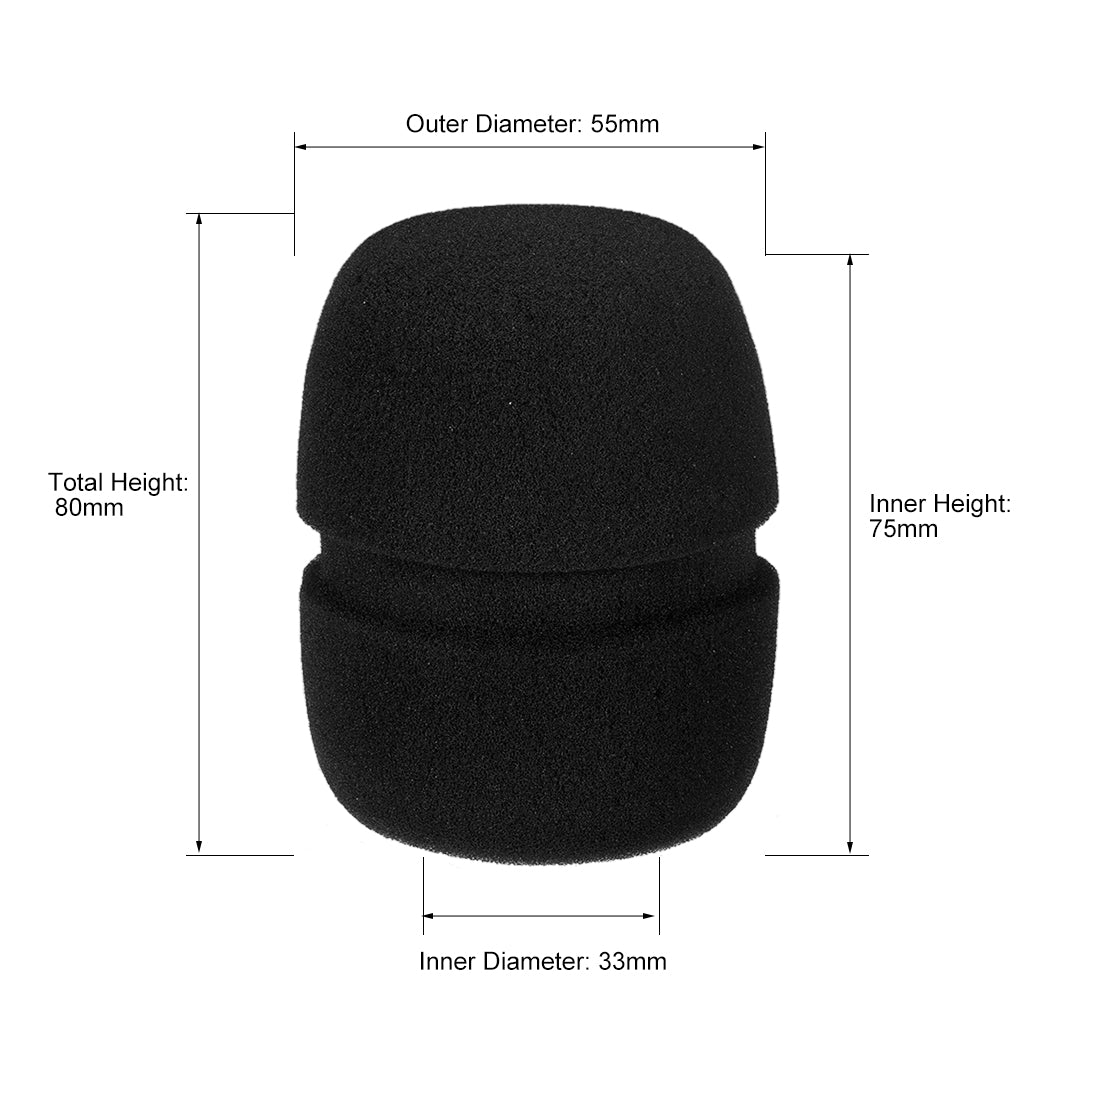 uxcell Uxcell 5X Sponge Foam Mic Cover Microphone Windscreen Shield Protection Black for KTV